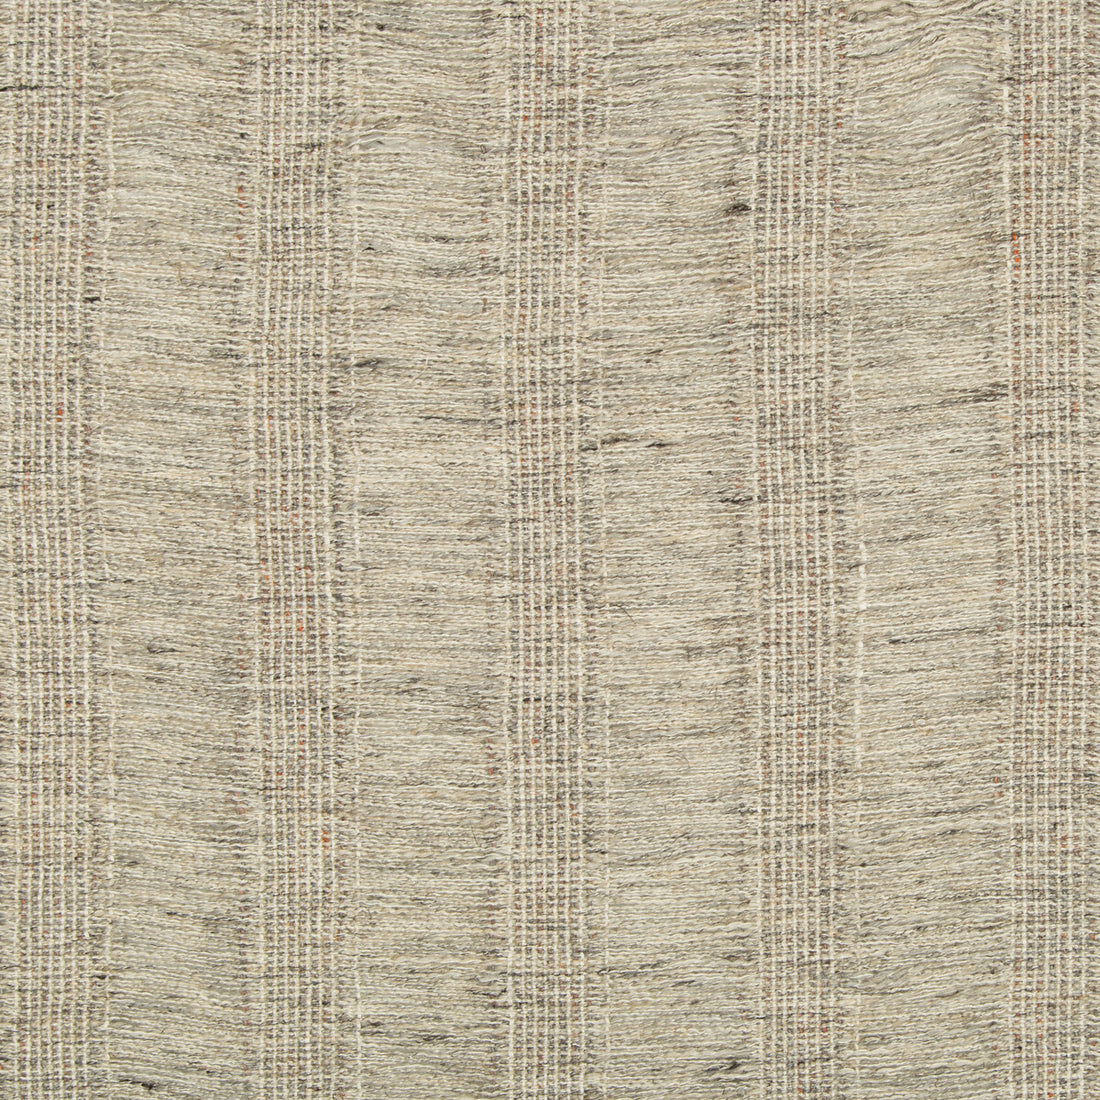 Kravet Couture fabric in 4227-106 color - pattern 4227.106.0 - by Kravet Couture